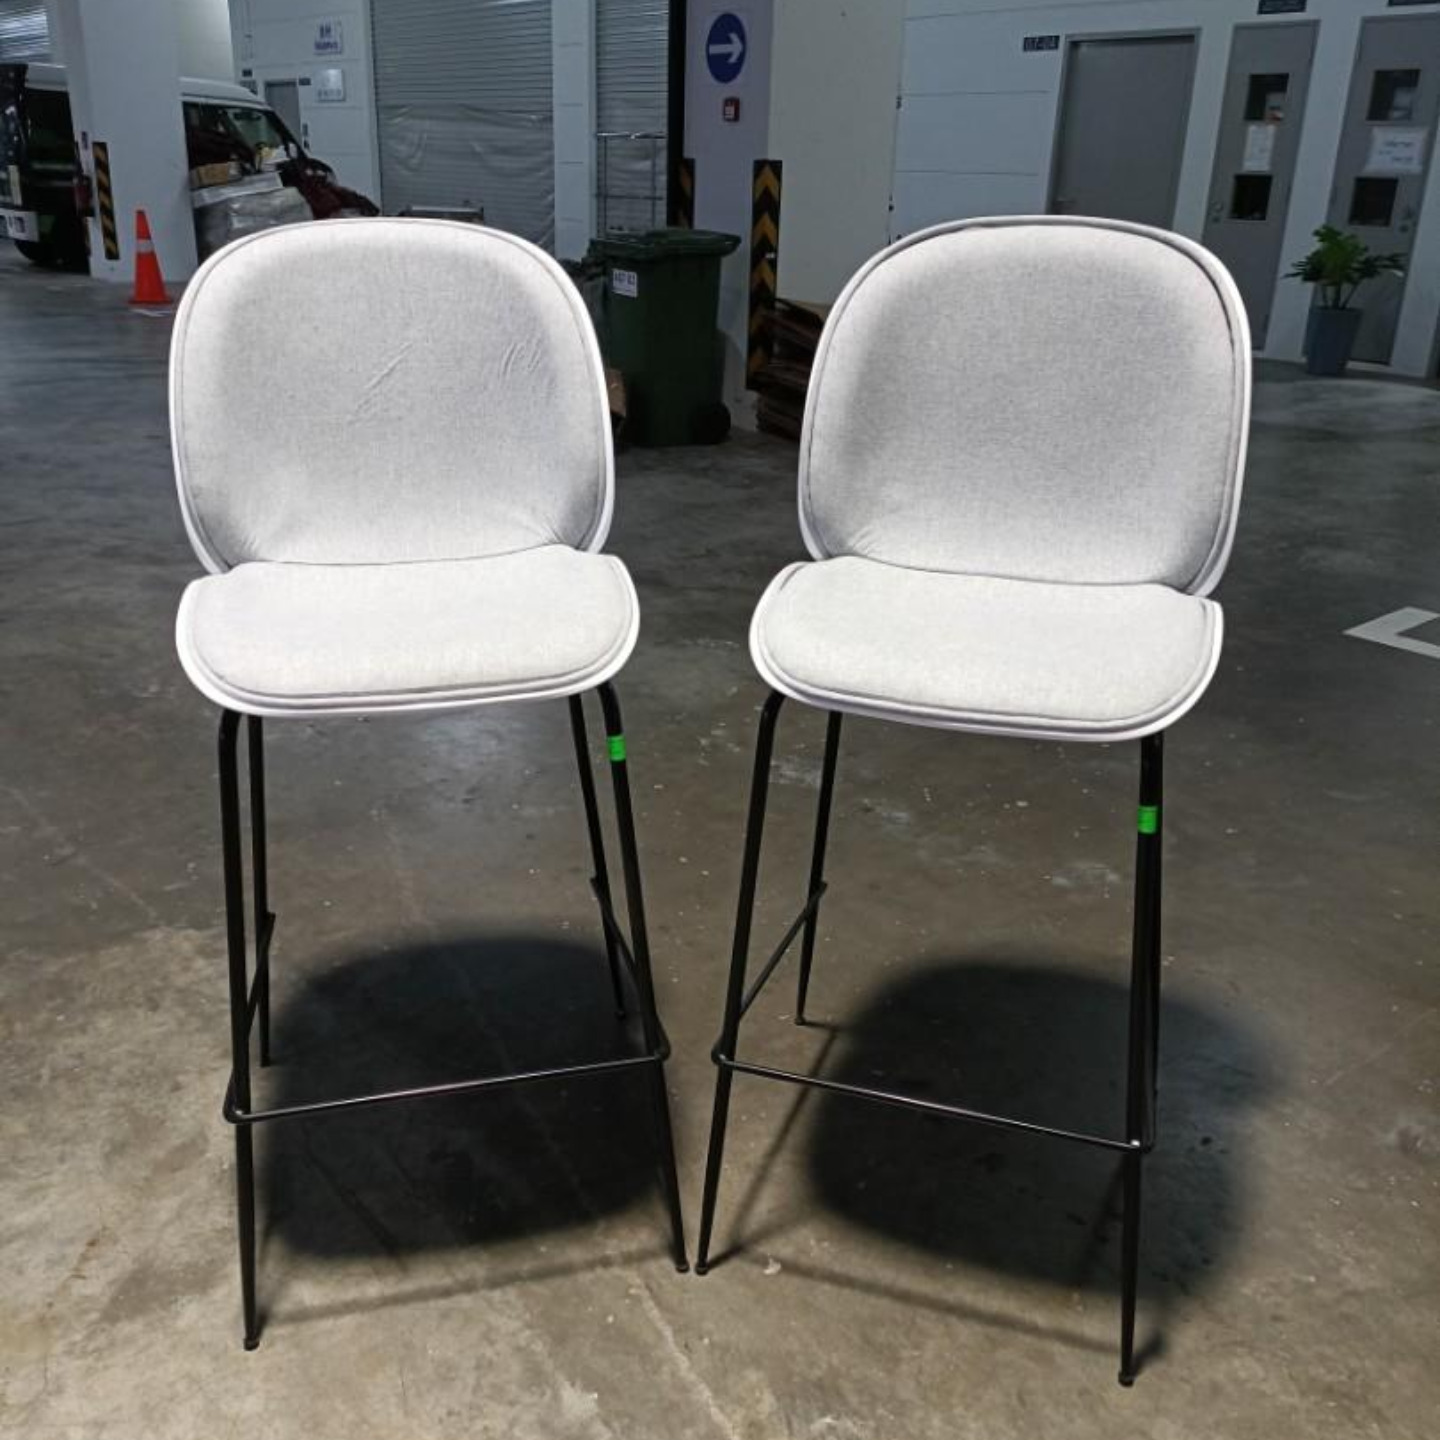 PAIR of VOLKZ Bar Chairs in LIGHT GREY FABRIC and White Back